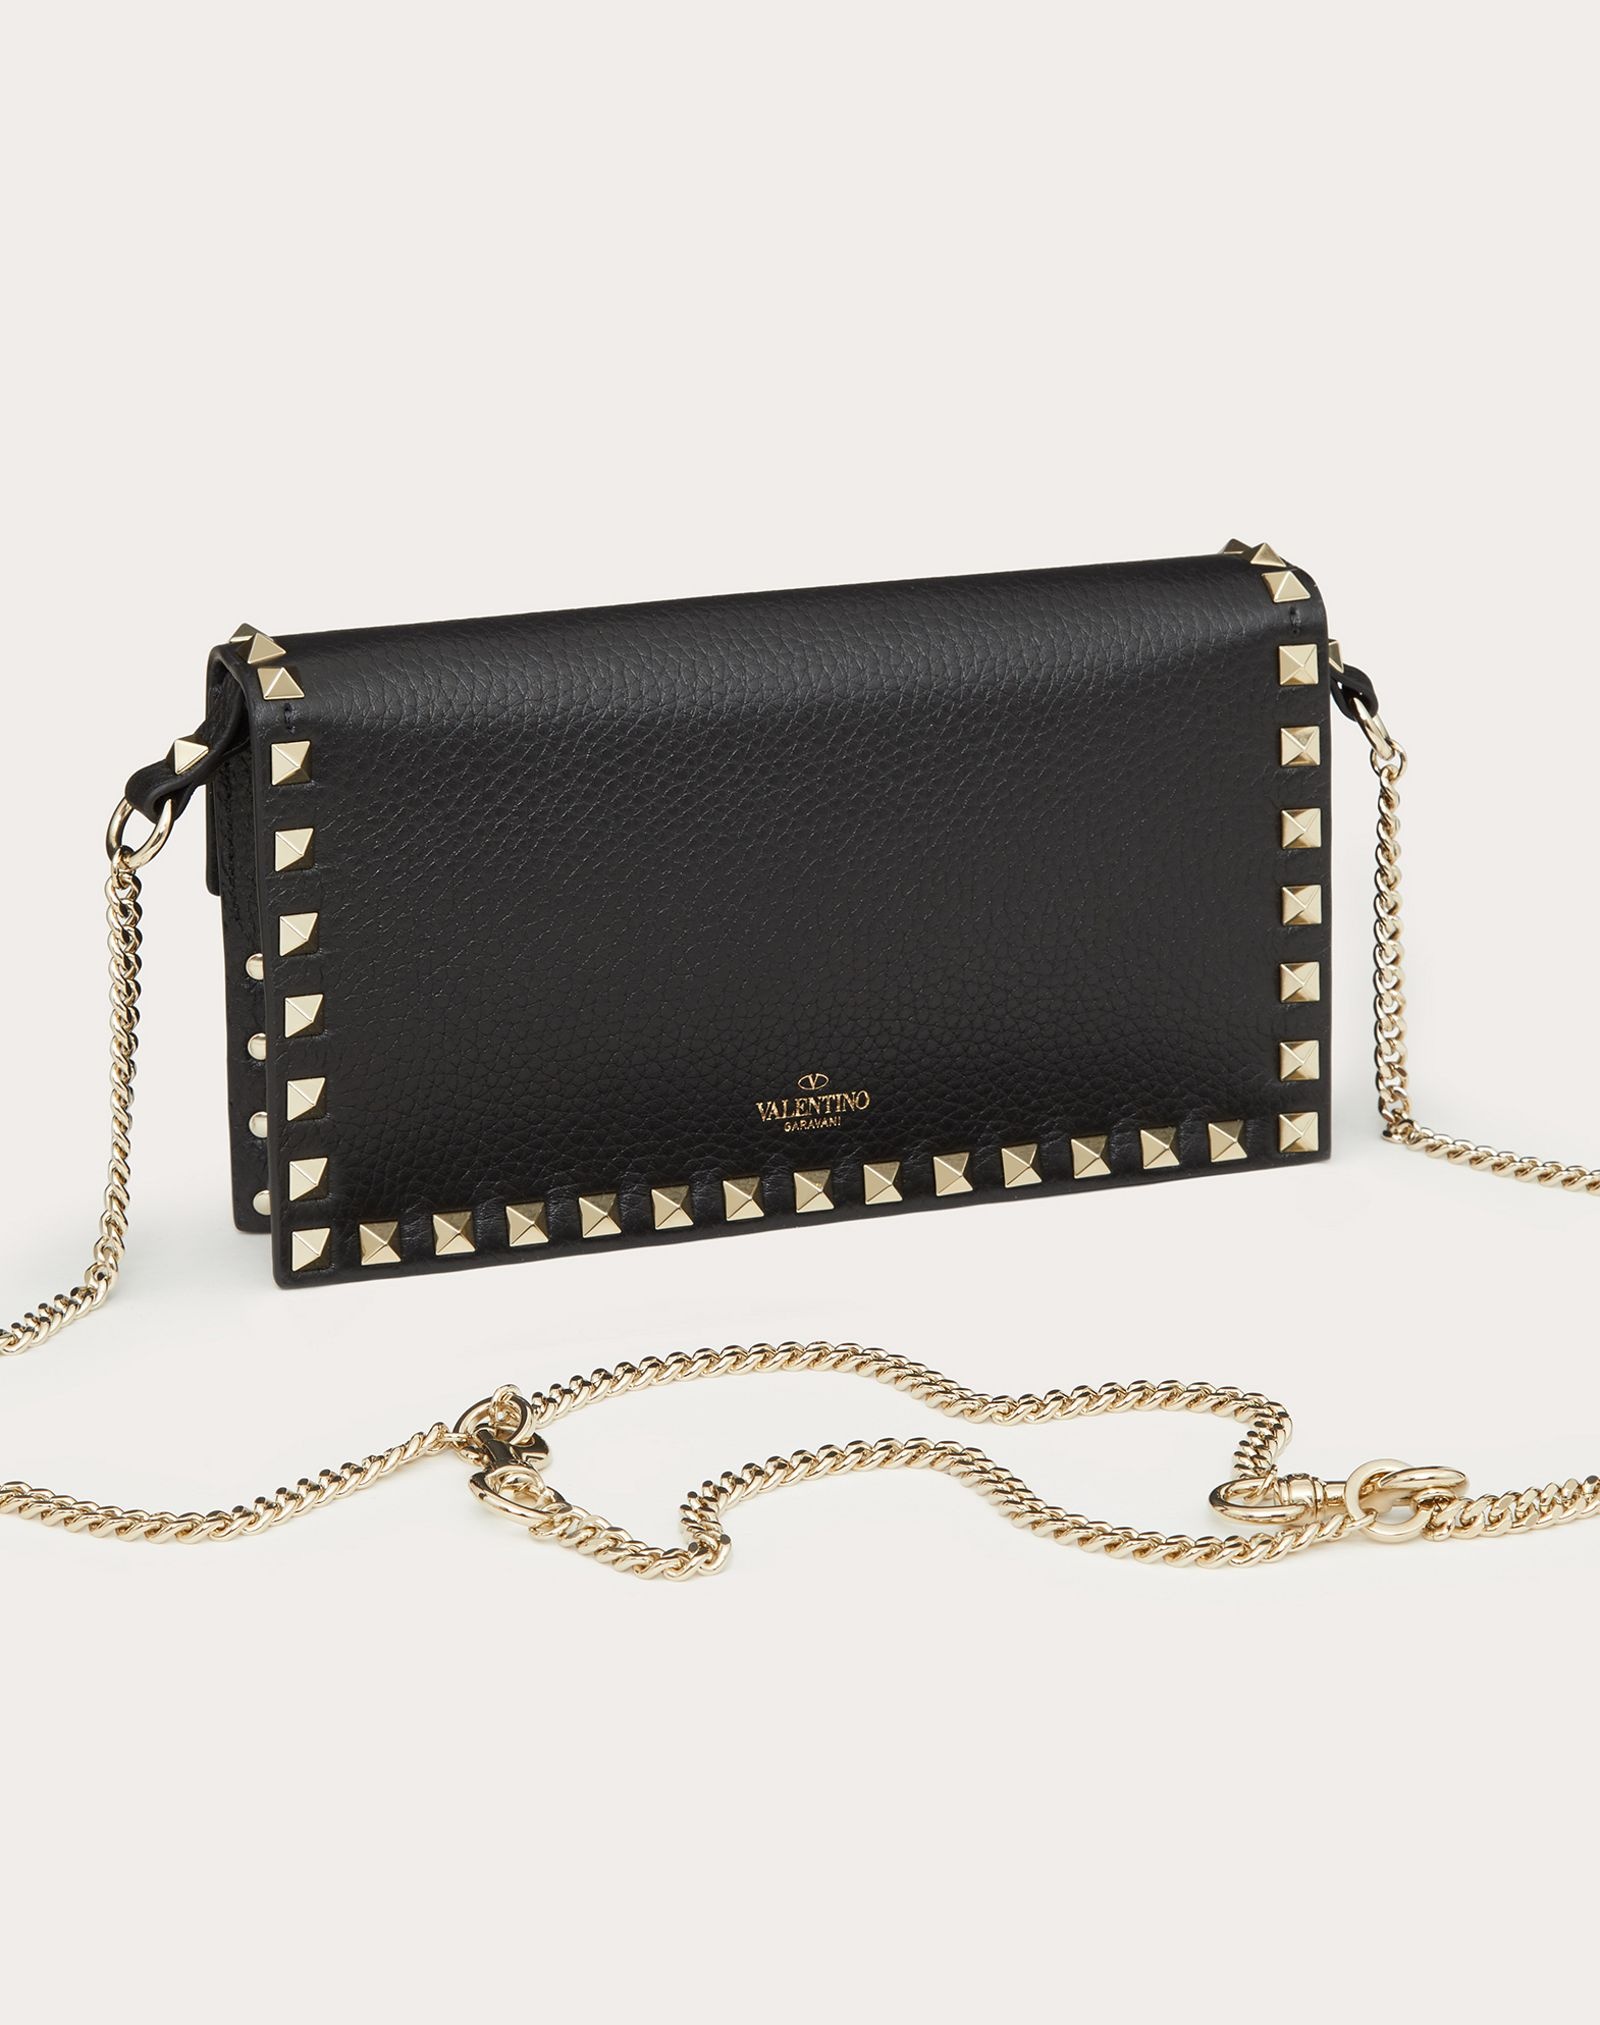 ROCKSTUD GRAINY CALFSKIN POUCH WITH ADJUSTABLE CHAIN STRAP - 3